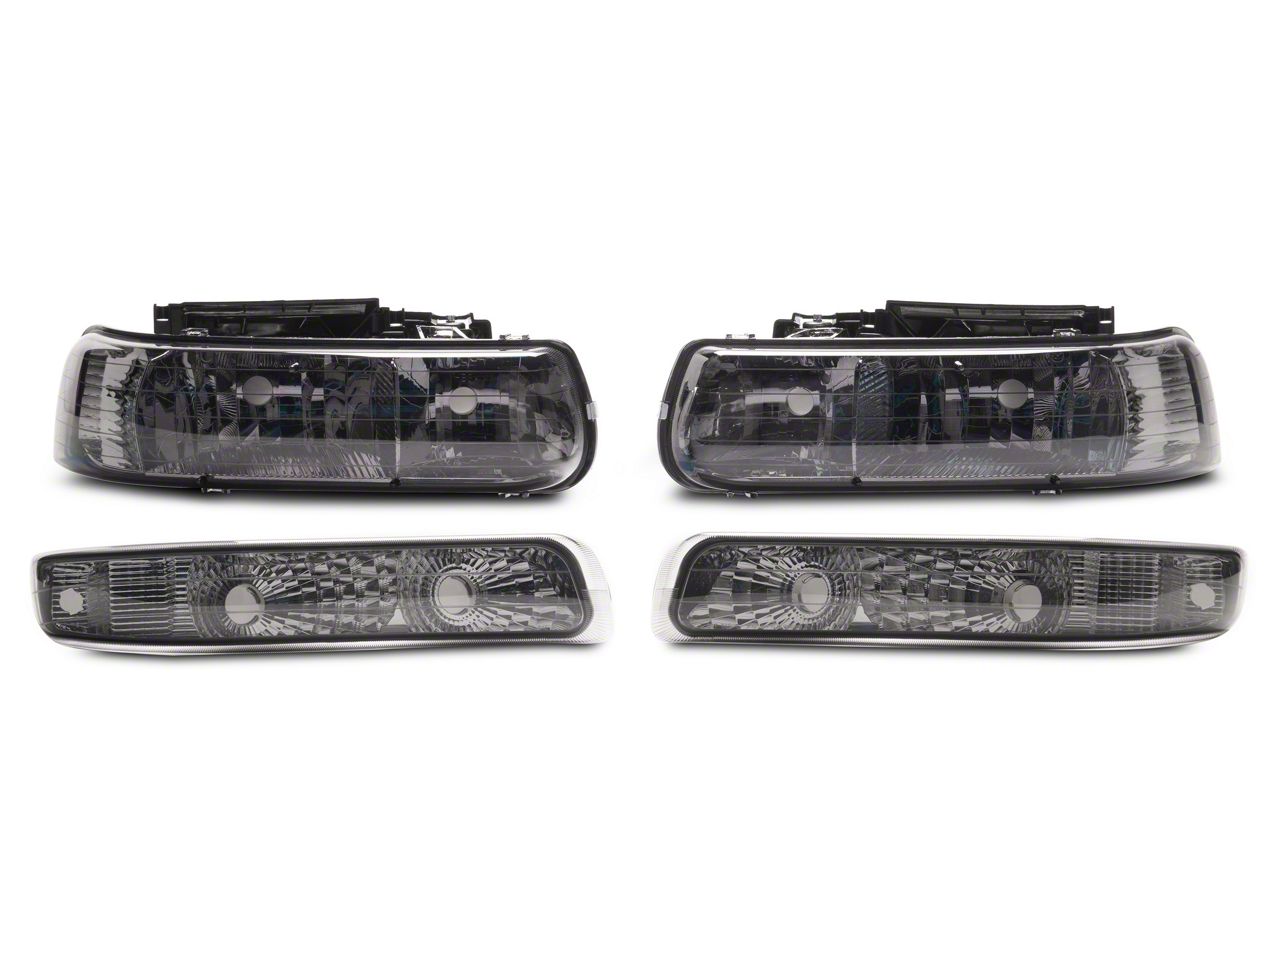 Chrome Smoked Lens LED Tail Light For Chevy Silverado 1st Gen 4pc Pair of Smoked Lens Clear Corner Headlight 